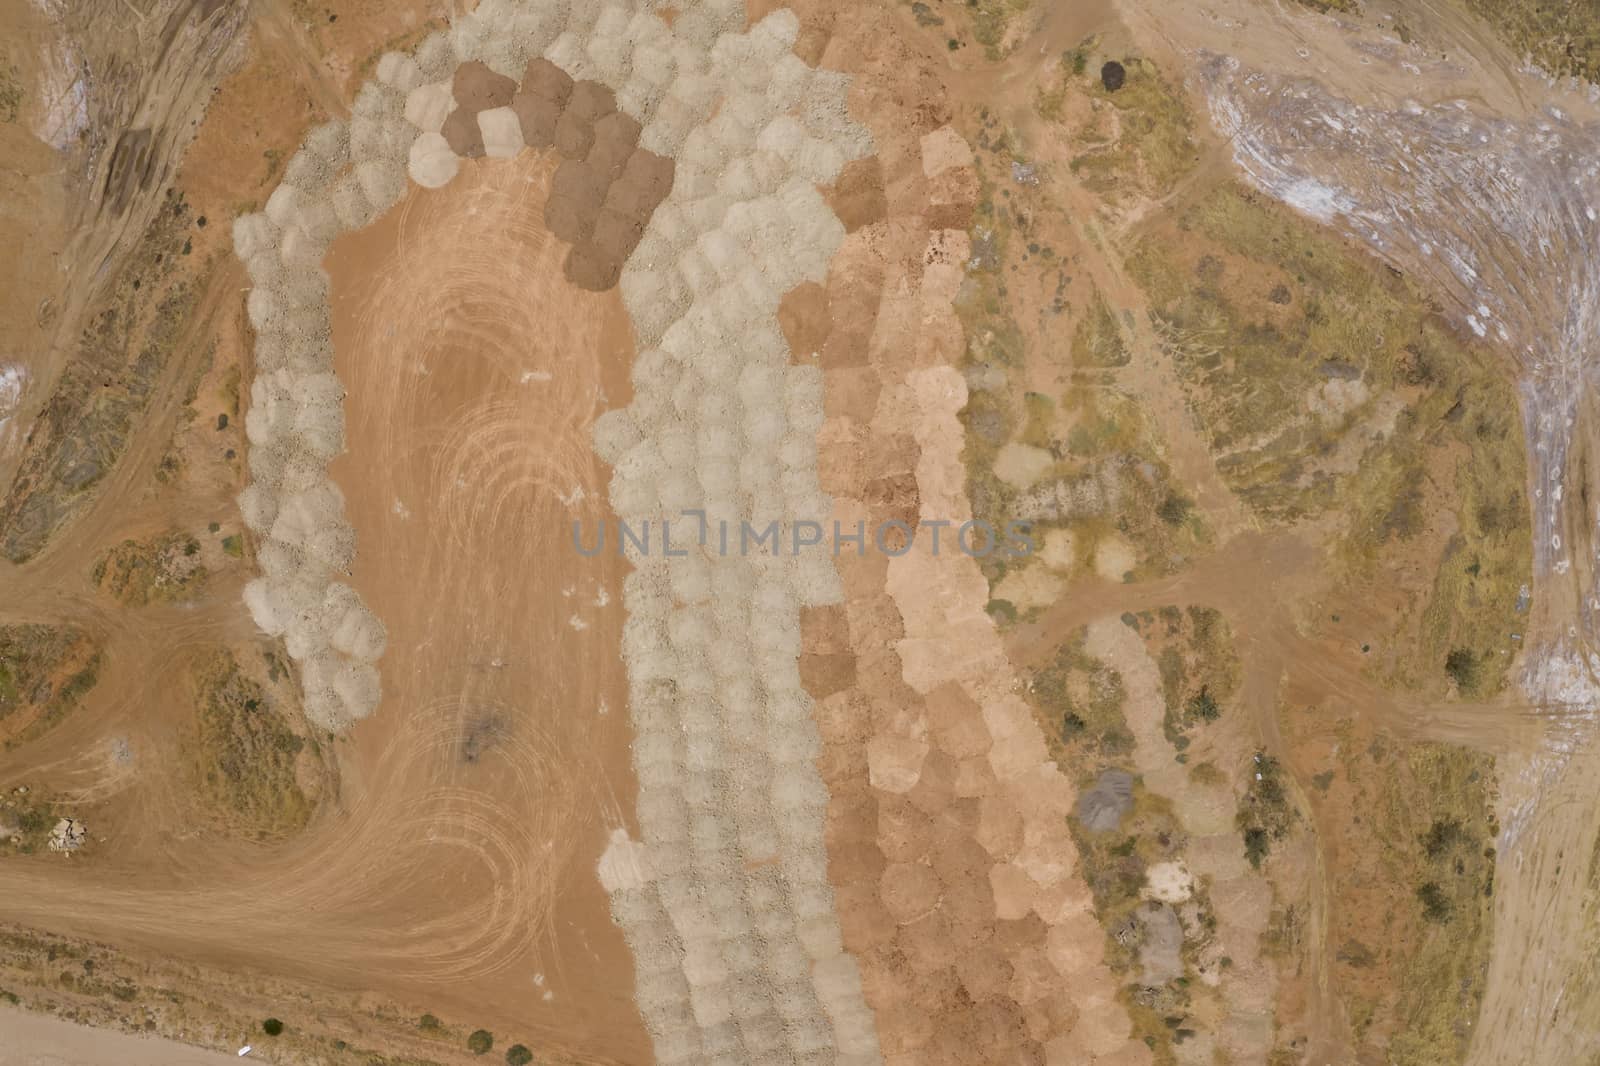 Aerial view of sand patterns in a dry river bed by WittkePhotos